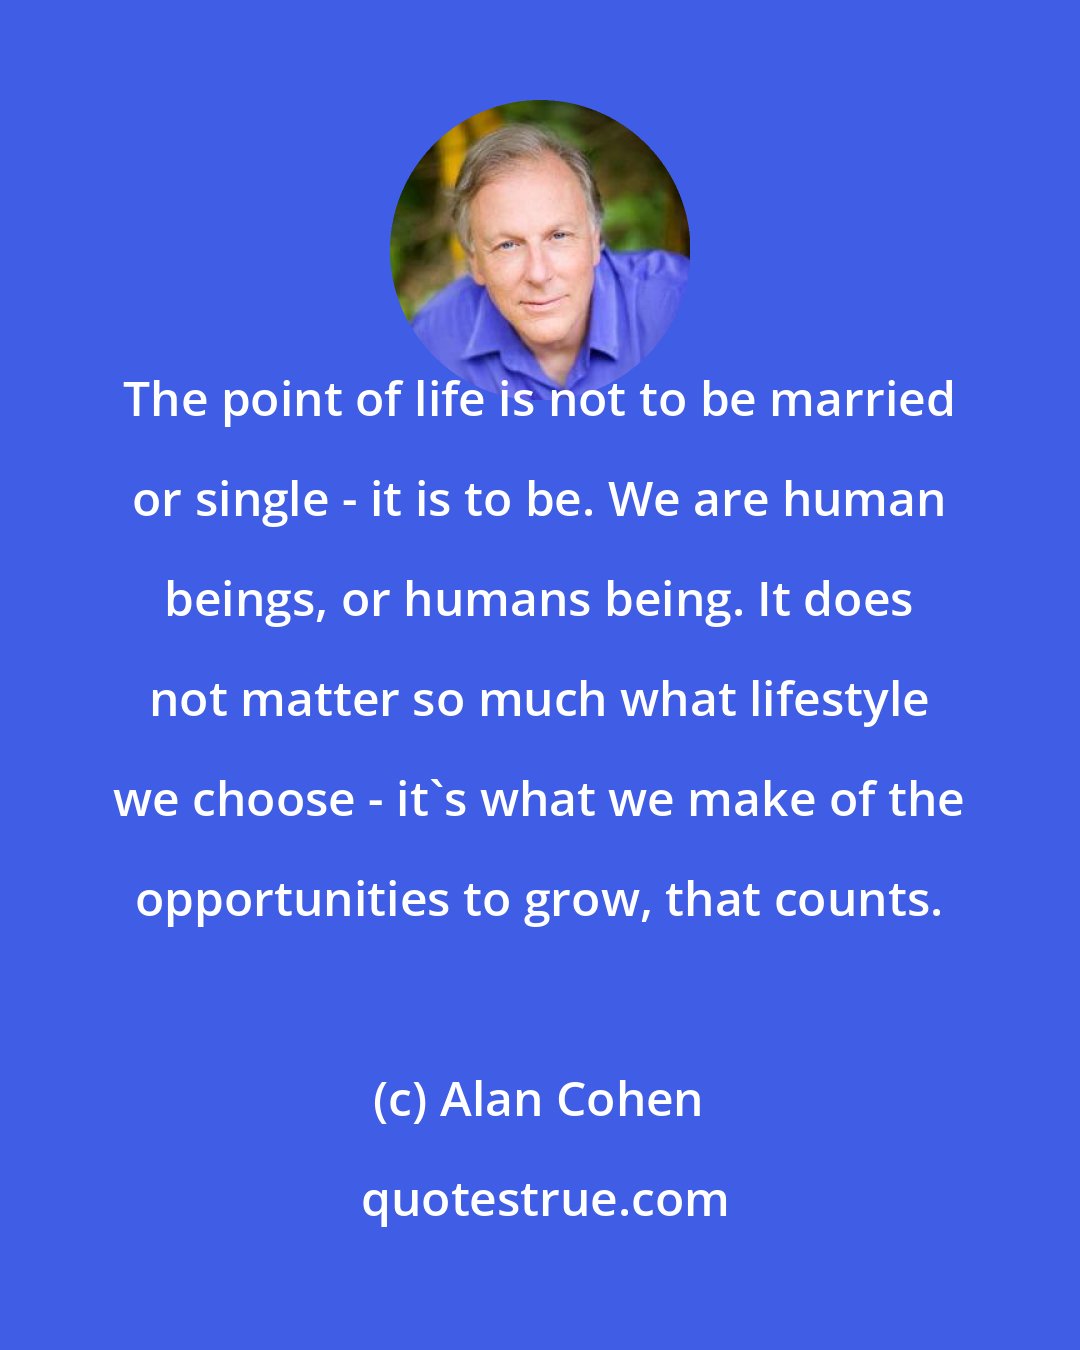 Alan Cohen: The point of life is not to be married or single - it is to be. We are human beings, or humans being. It does not matter so much what lifestyle we choose - it's what we make of the opportunities to grow, that counts.